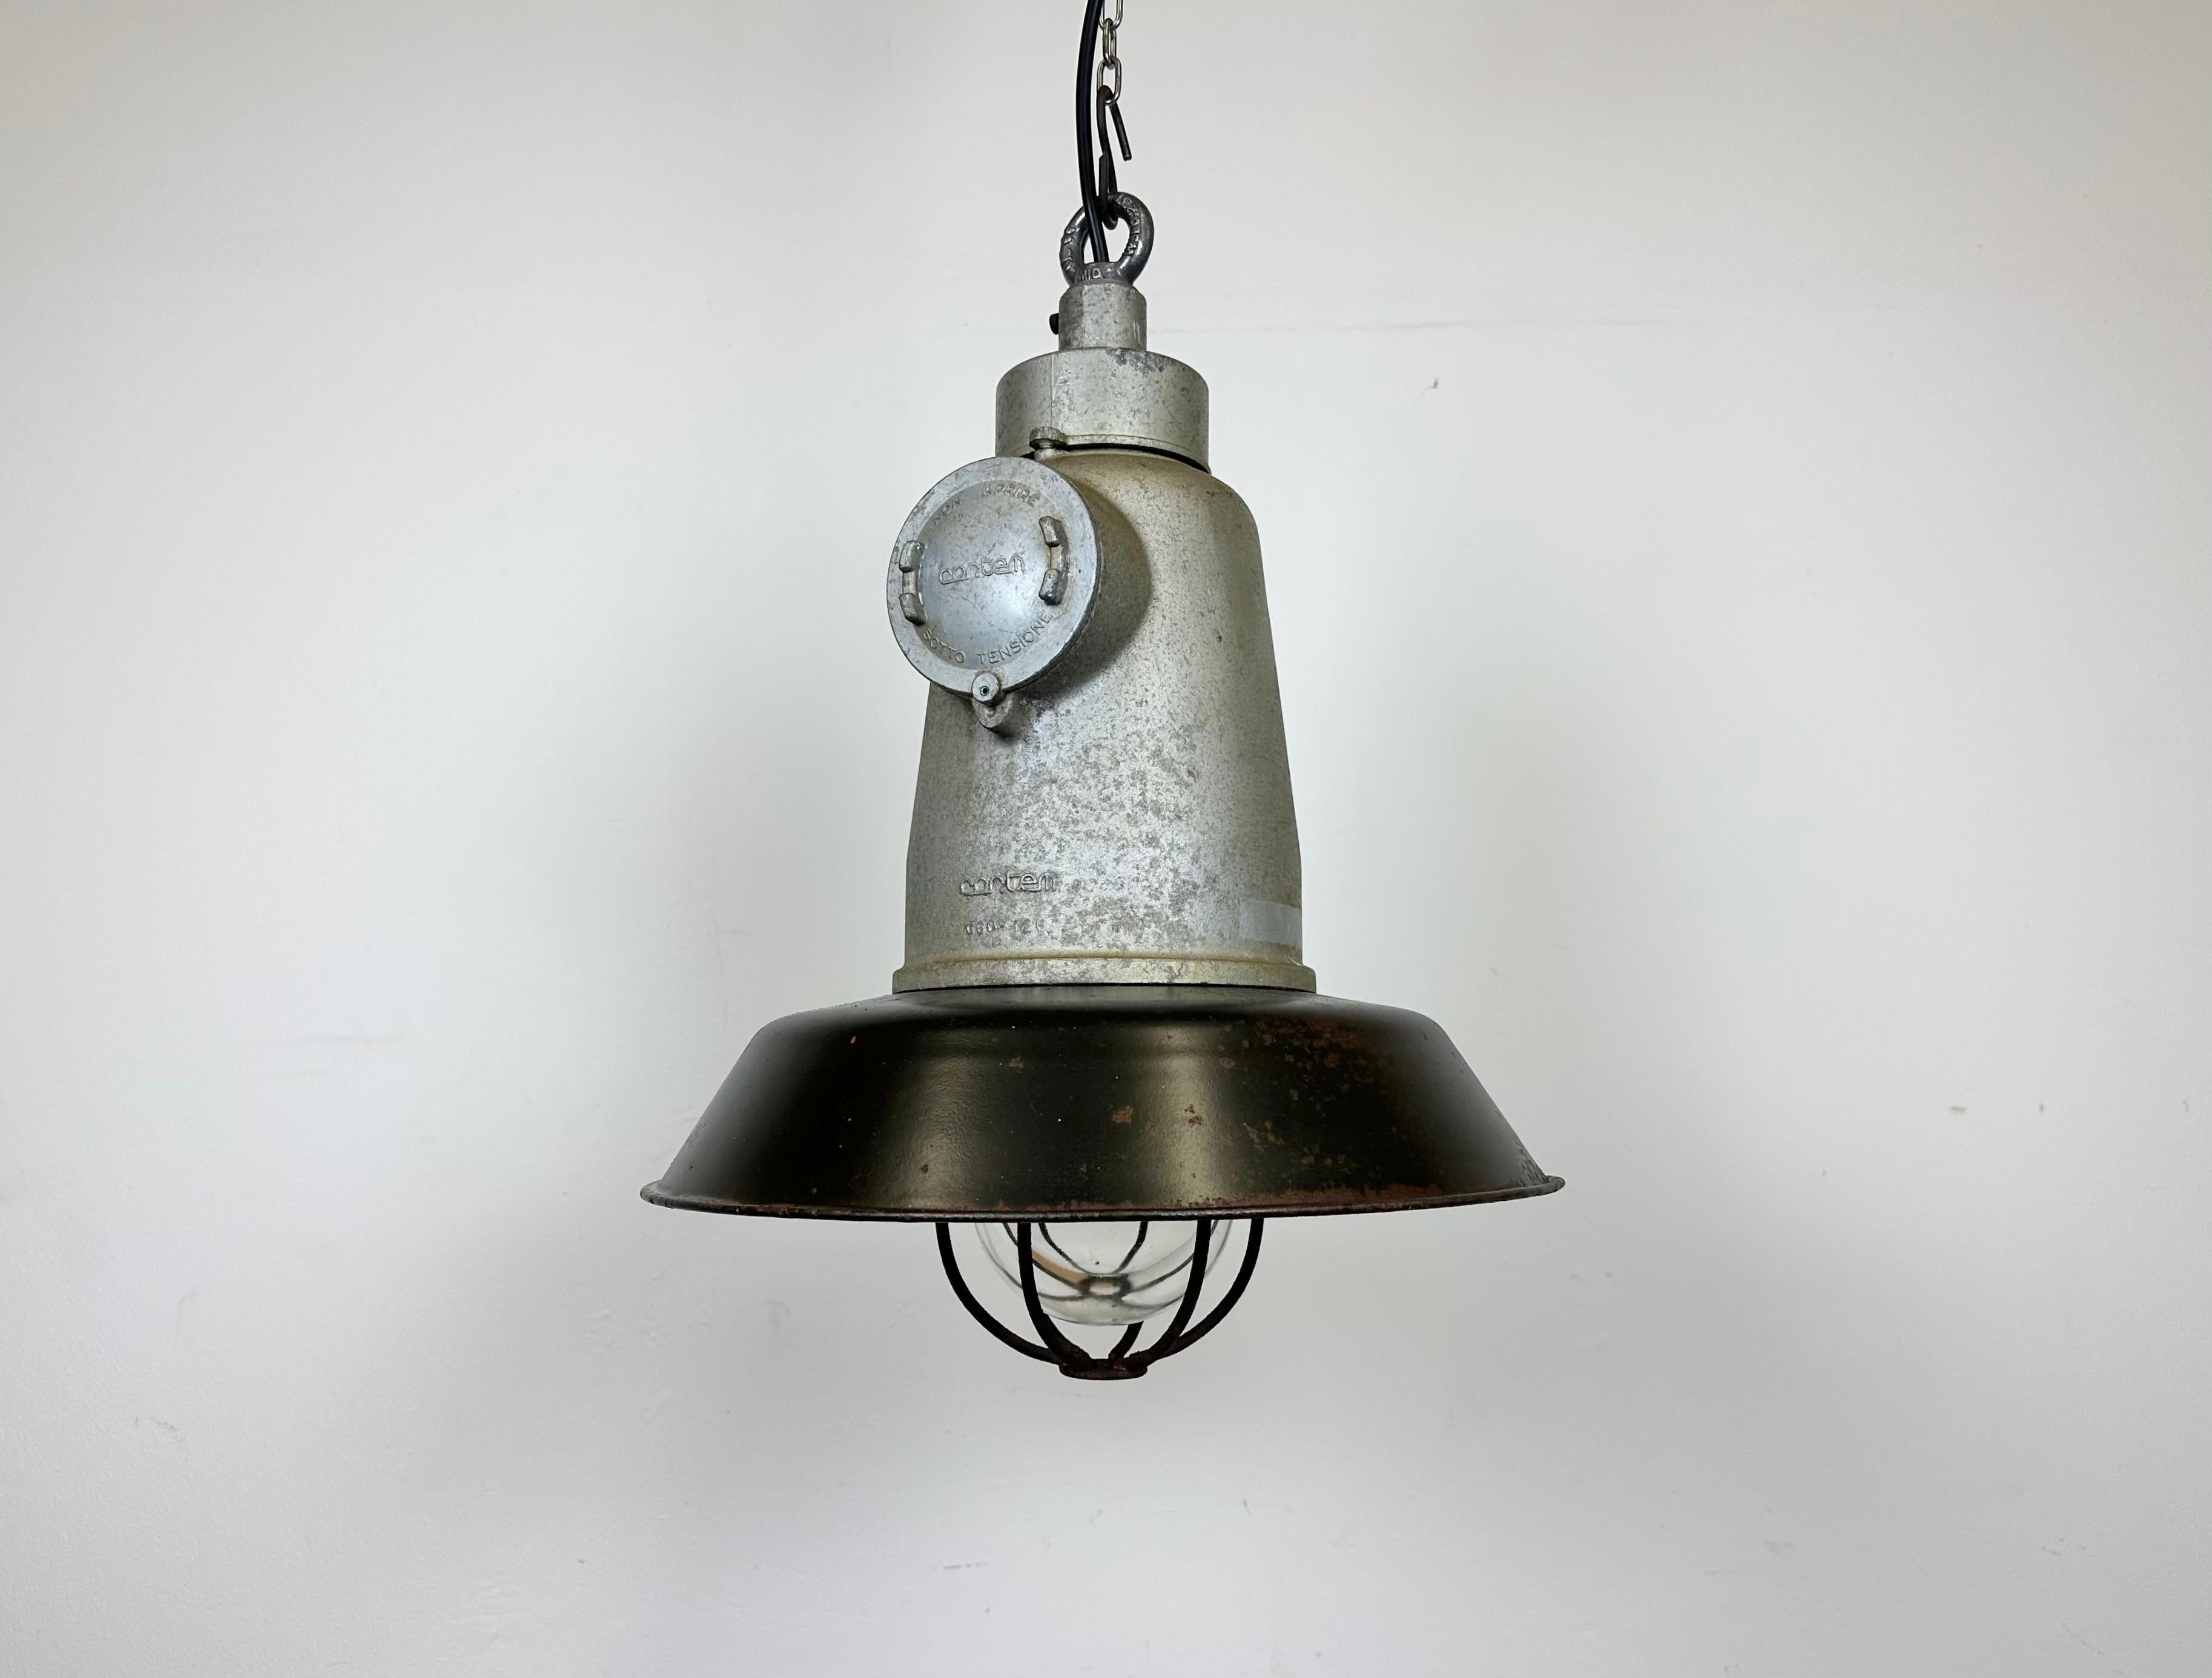 Italian Industrial Black Enamel Cage Pendant Light from Cortem, 1960s In Good Condition For Sale In Kojetice, CZ